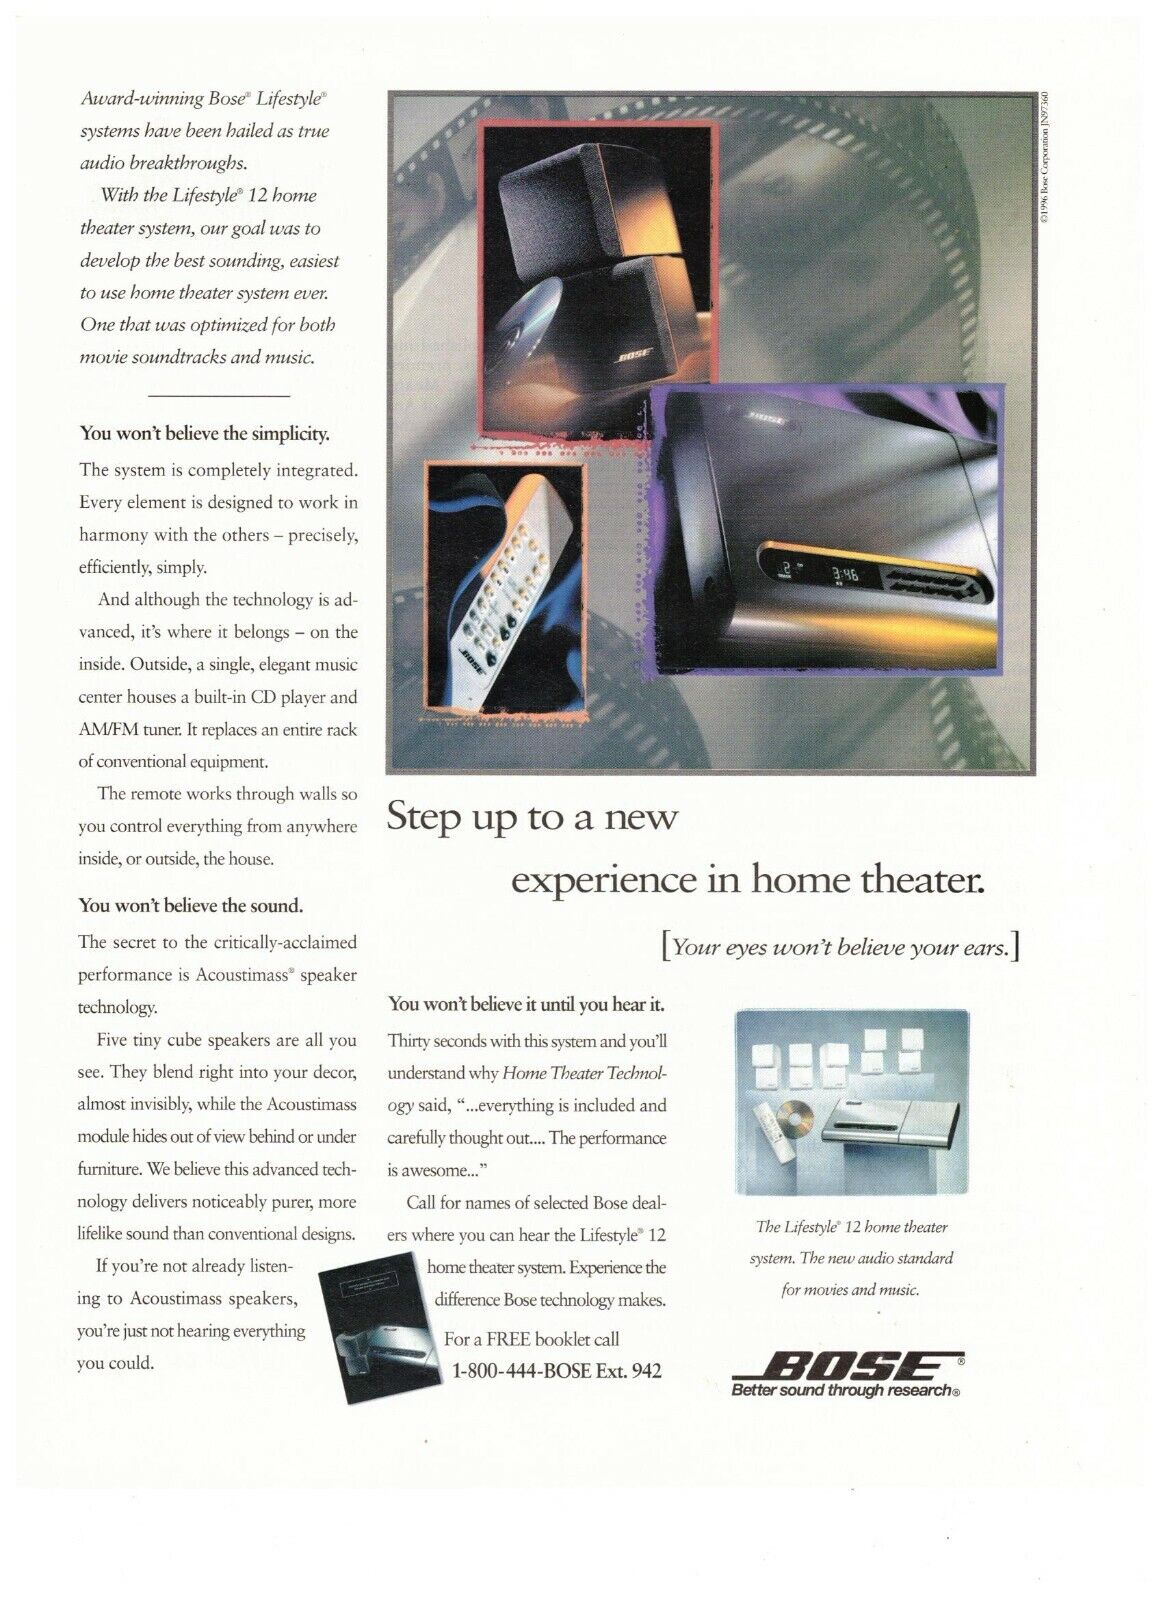 1997 Bose Lifestyle 12 Home Theater New Experience Vintage Print Advertisement